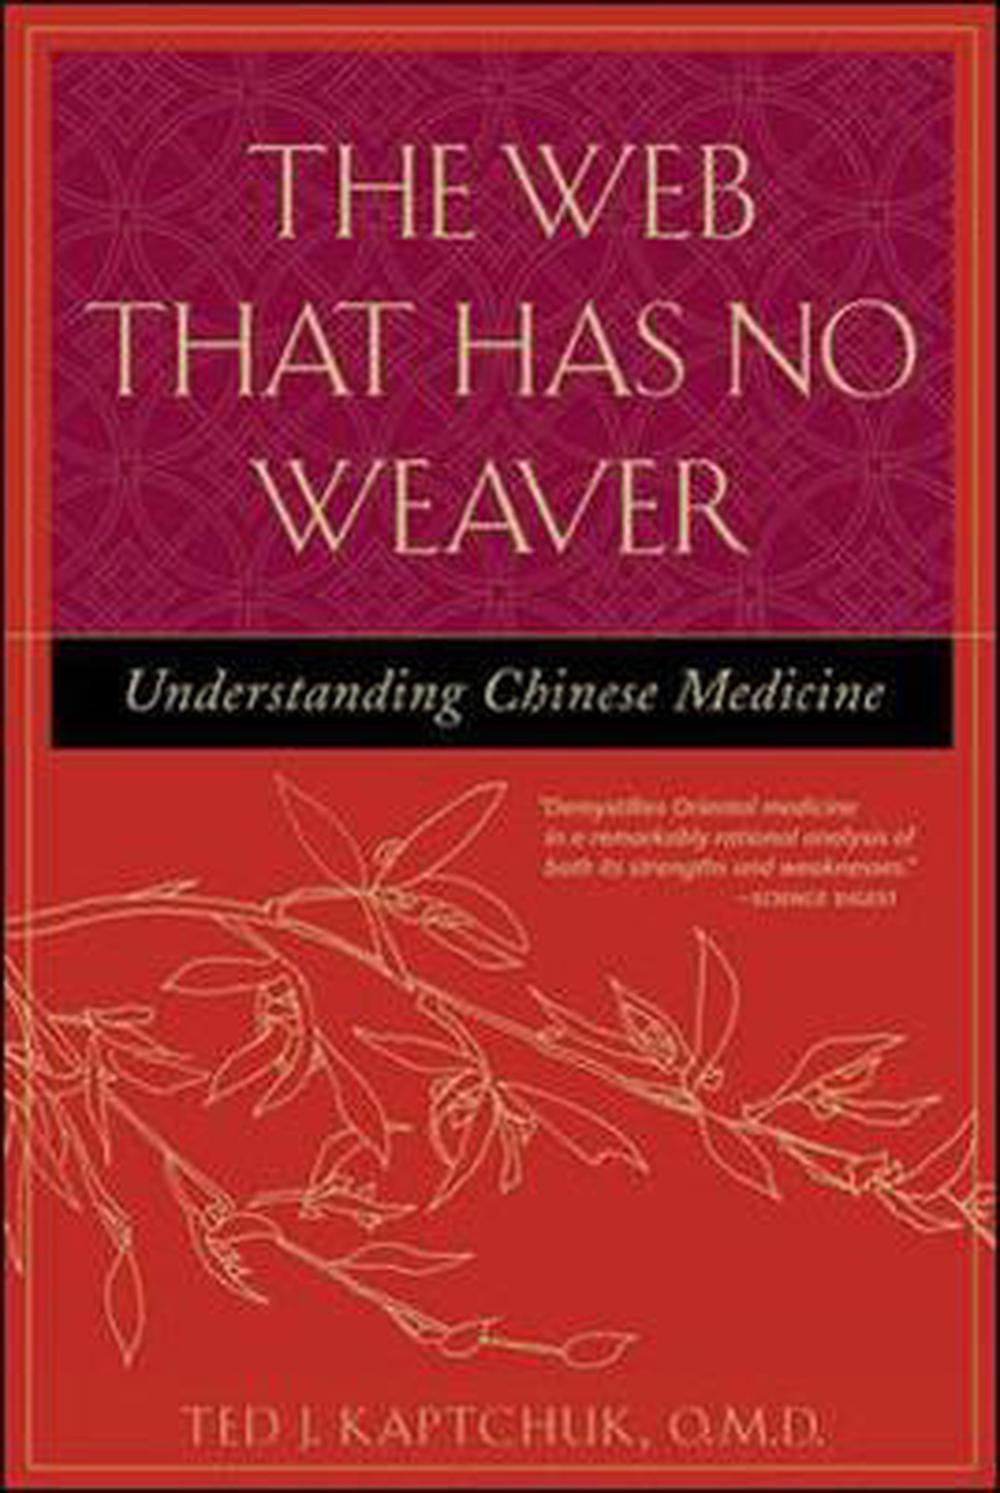 The Web That Has No Weaver Understanding Chinese Medicine by Ted J